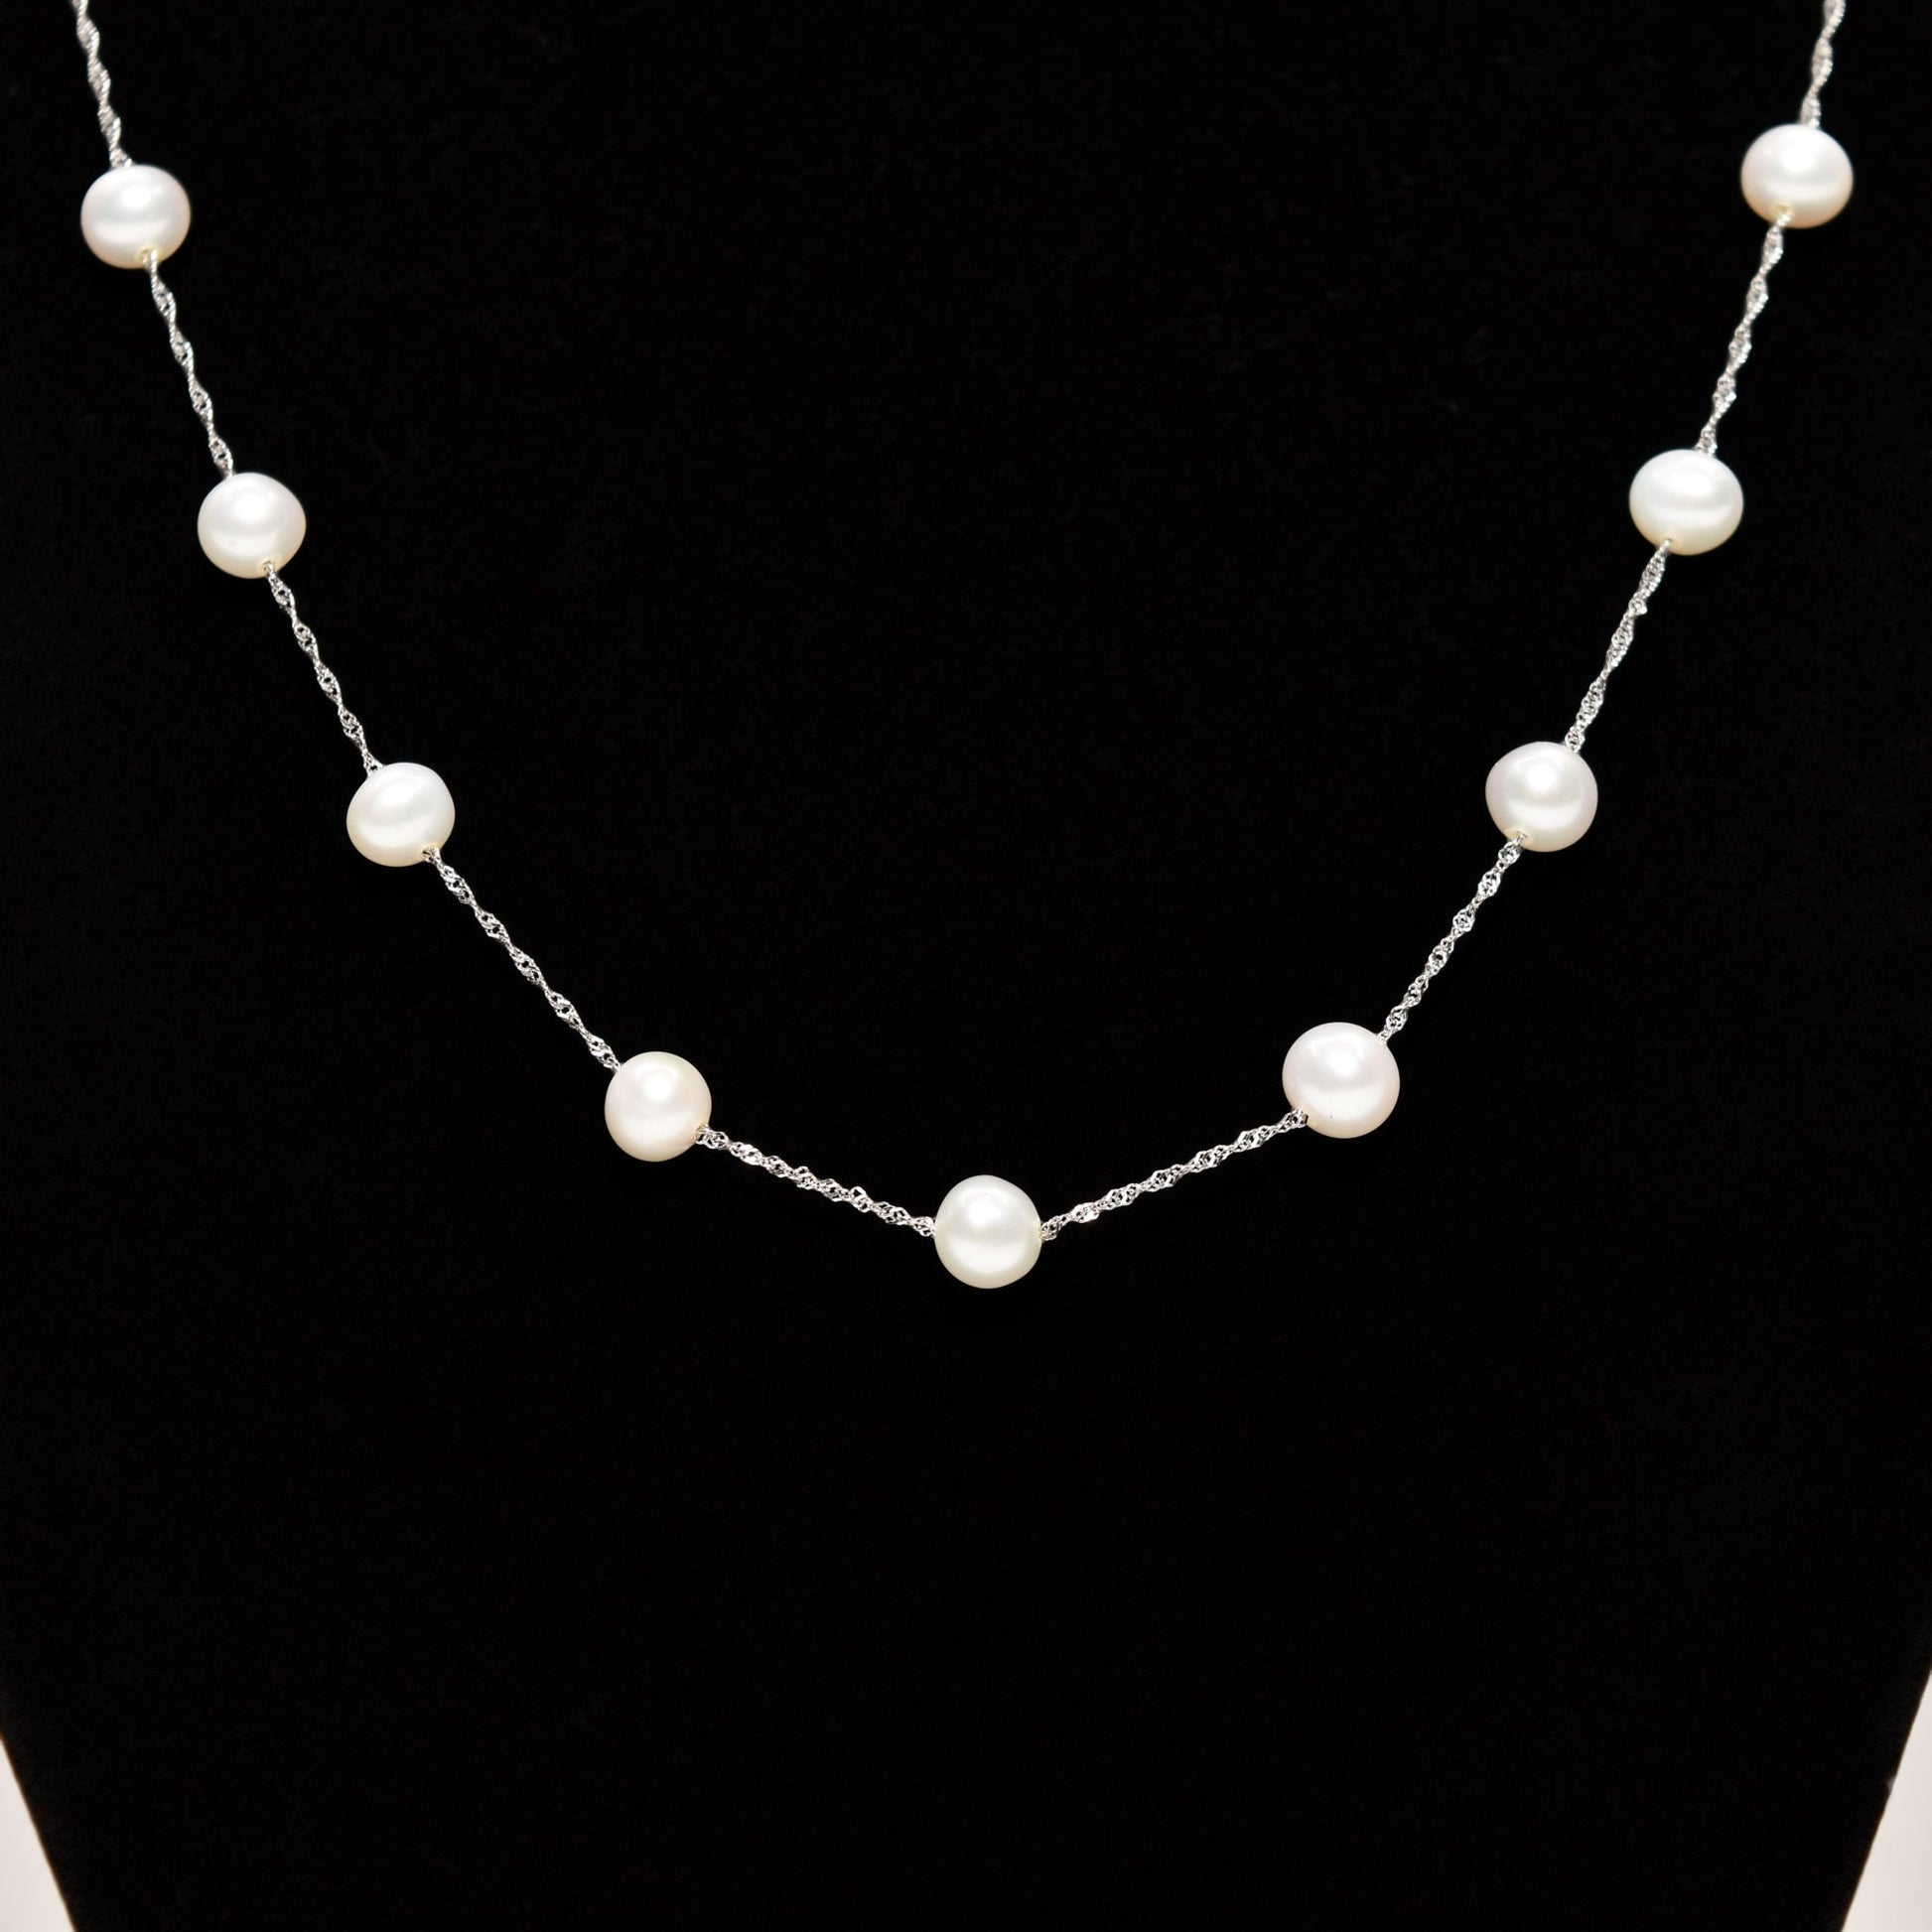 Elegant white pearl choker necklace in 14K white gold with pearl stations on a black display, 17.75 inches long.